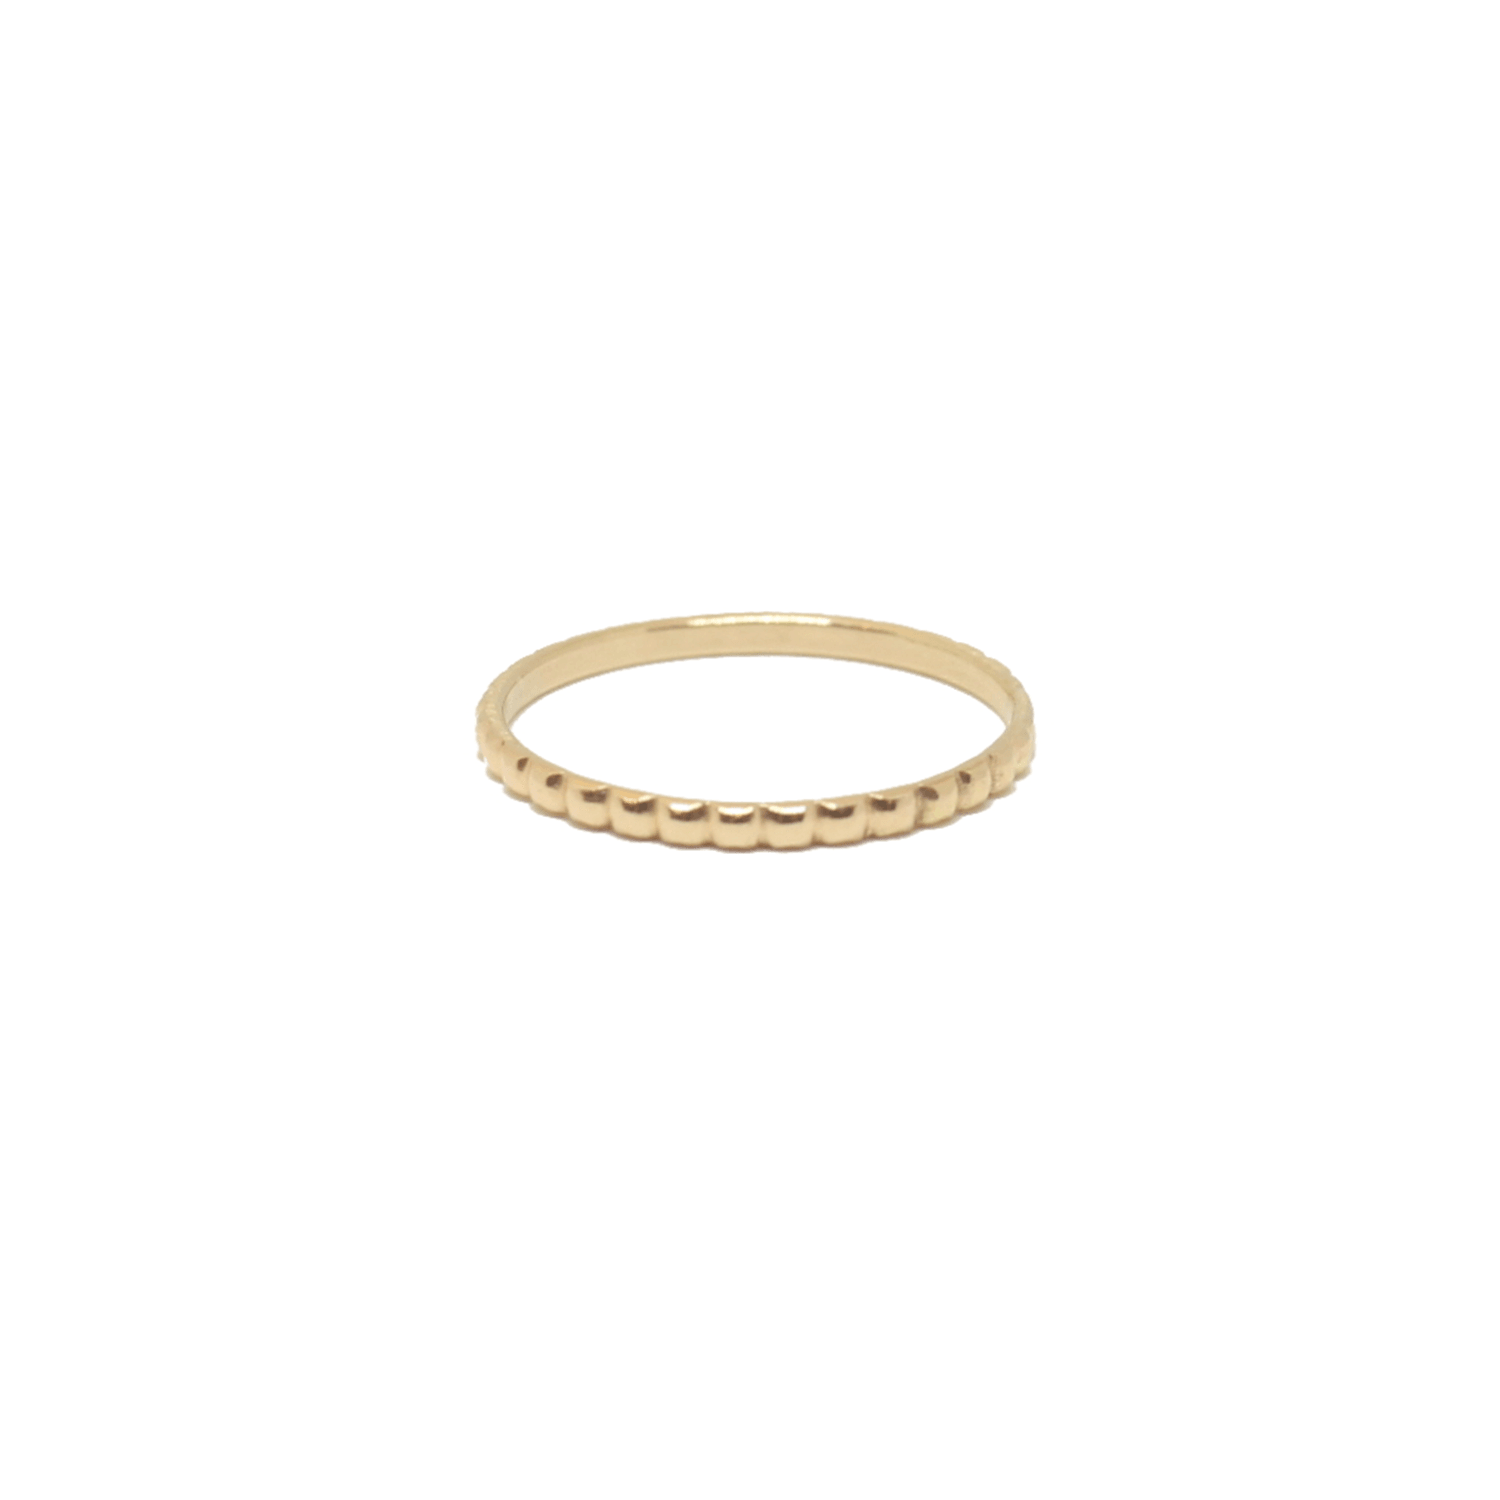 The Smart Minimalist - Patterned Solid 14k Gold Stacking Ring - Canada 6.5